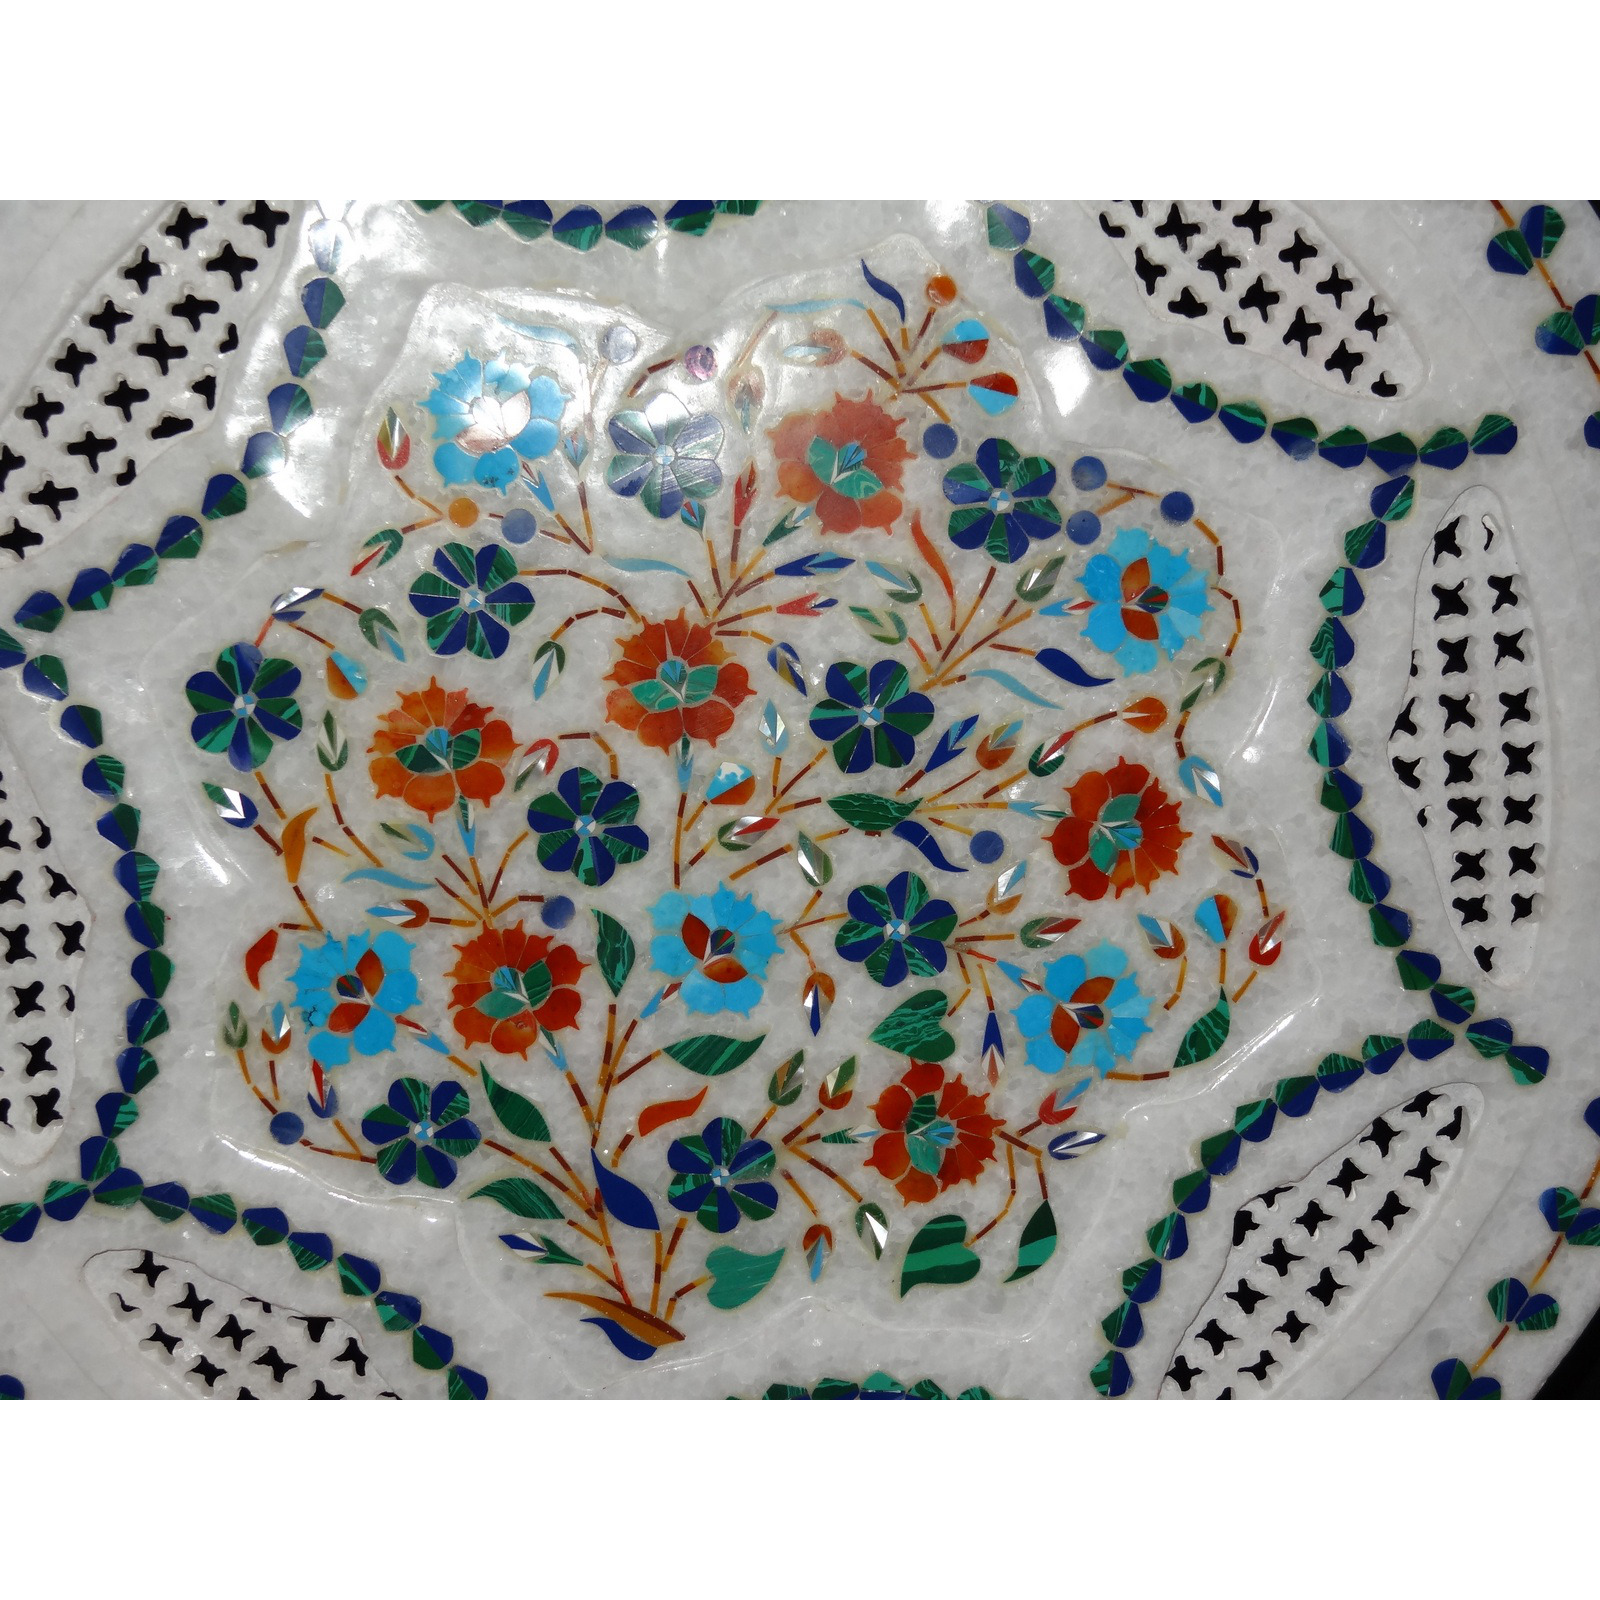 Marble Serving  Plate